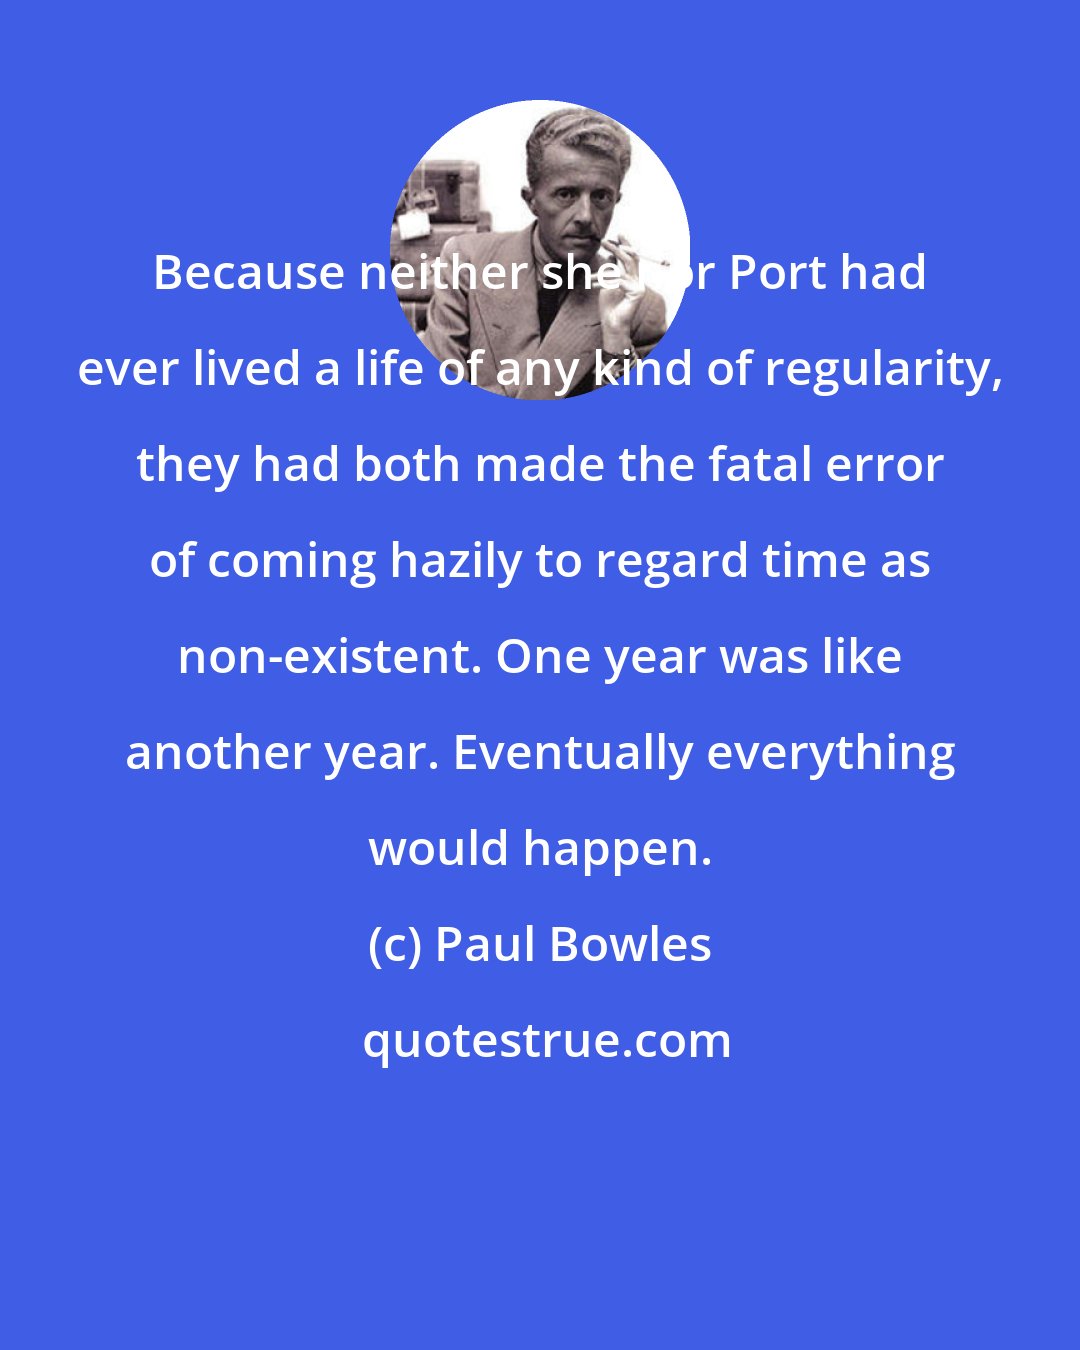 Paul Bowles: Because neither she nor Port had ever lived a life of any kind of regularity, they had both made the fatal error of coming hazily to regard time as non-existent. One year was like another year. Eventually everything would happen.